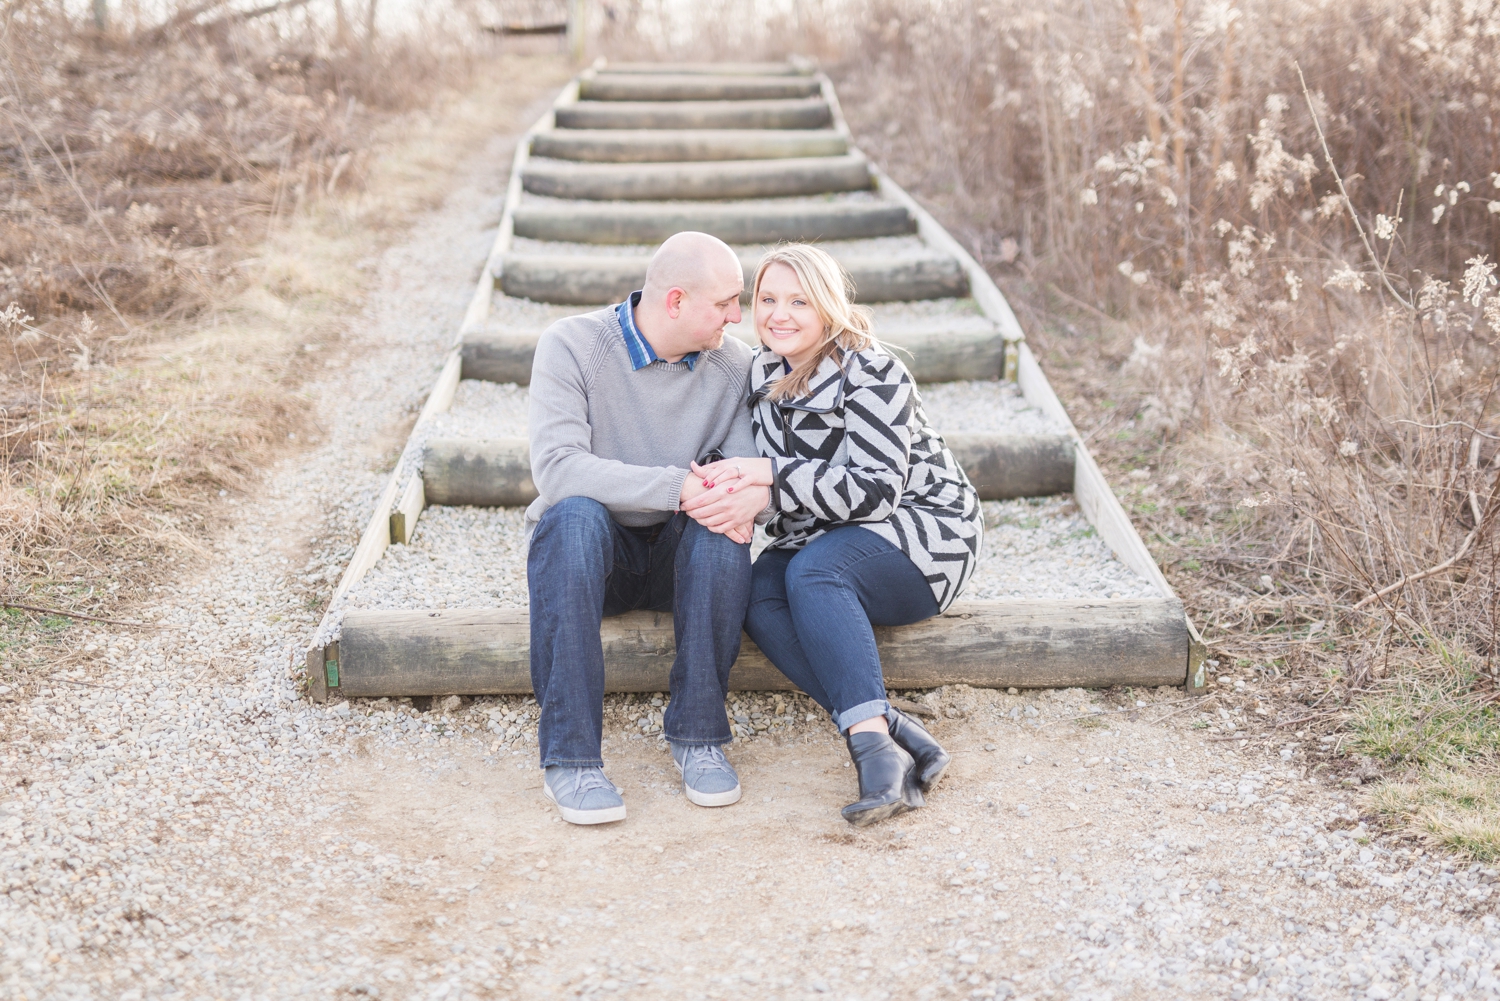 winter-engaged-couple-at-their-photo-session-at-the-scioto-audubon-park-near-grange-audubon-center-with-walkways-and-grass_0334